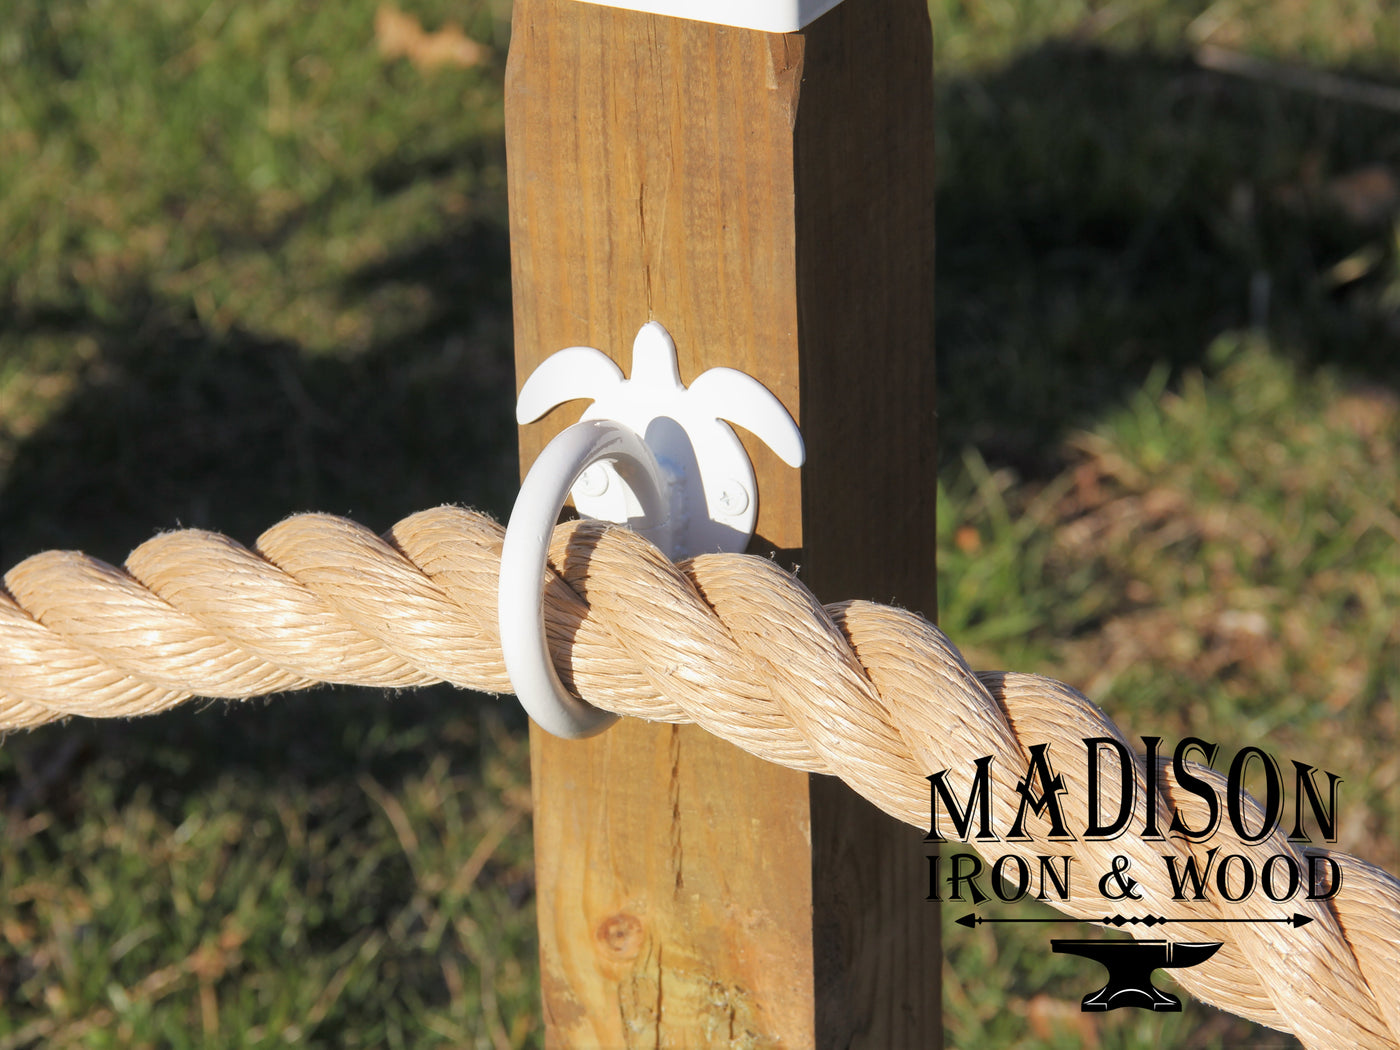 Nautical Rope - Madison Iron and Wood - Post Cap - metal outdoor decor - Steel deocrations - american made products - veteran owned business products - fencing decorations - fencing supplies - custom wall decorations - personalized wall signs - steel - decorative post caps - steel post caps - metal post caps - brackets - structural brackets - home improvement - easter - easter decorations - easter gift - easter yard decor